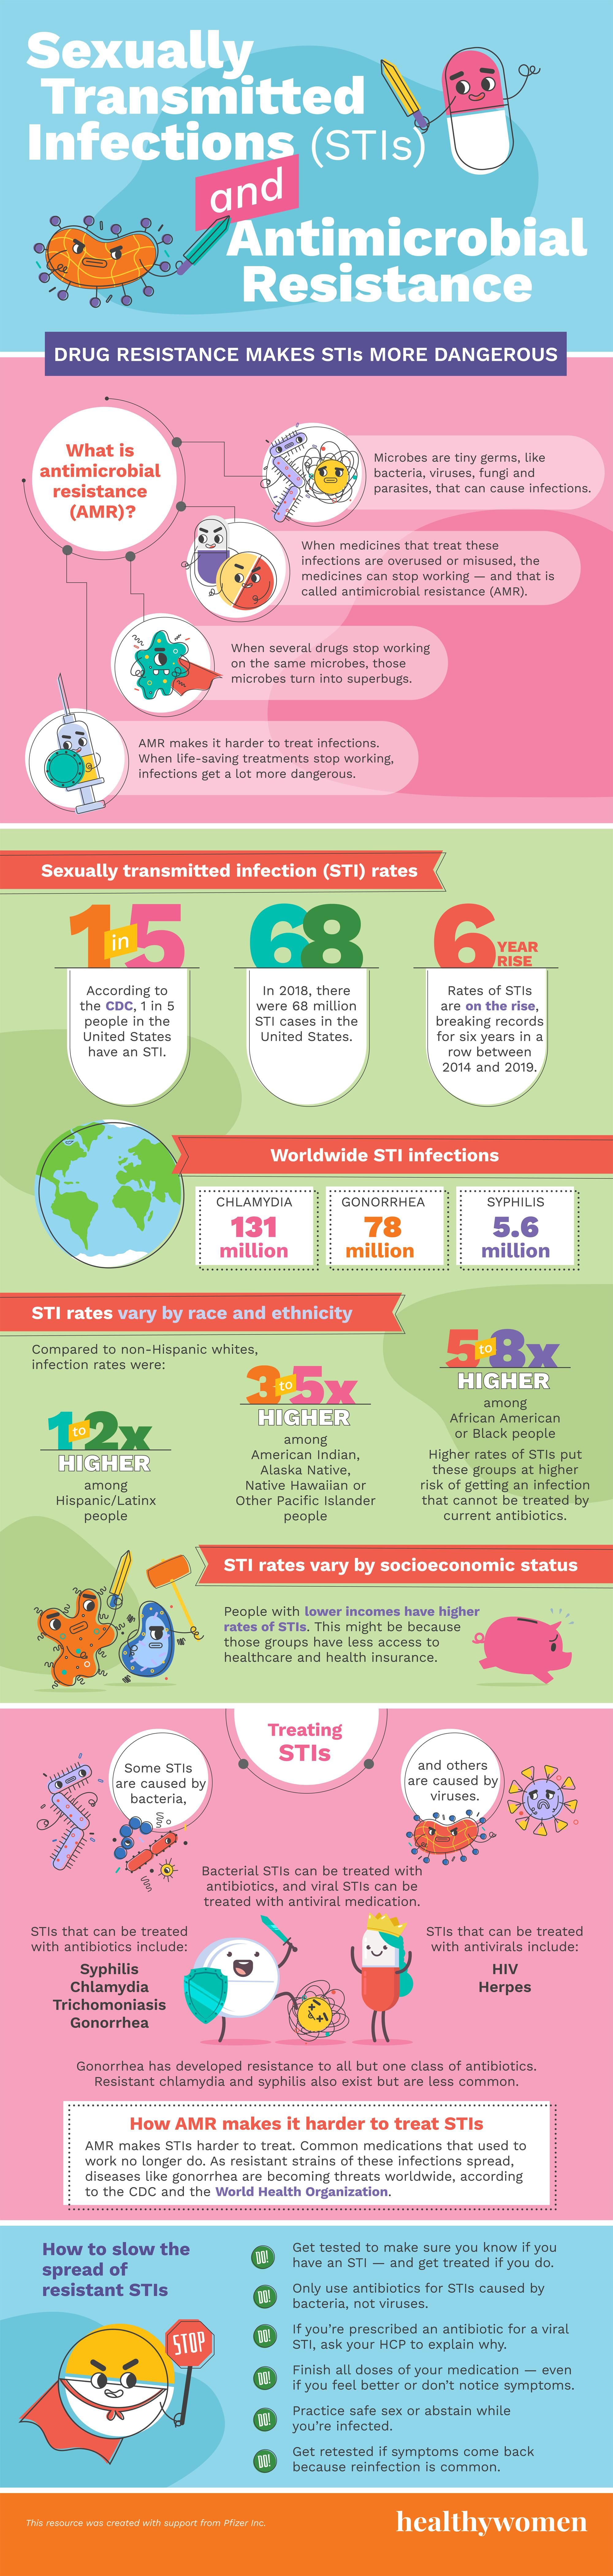 Infographic Sexually Transmitted Infections (STI) and Drug Resistance.  Click image to open PDF